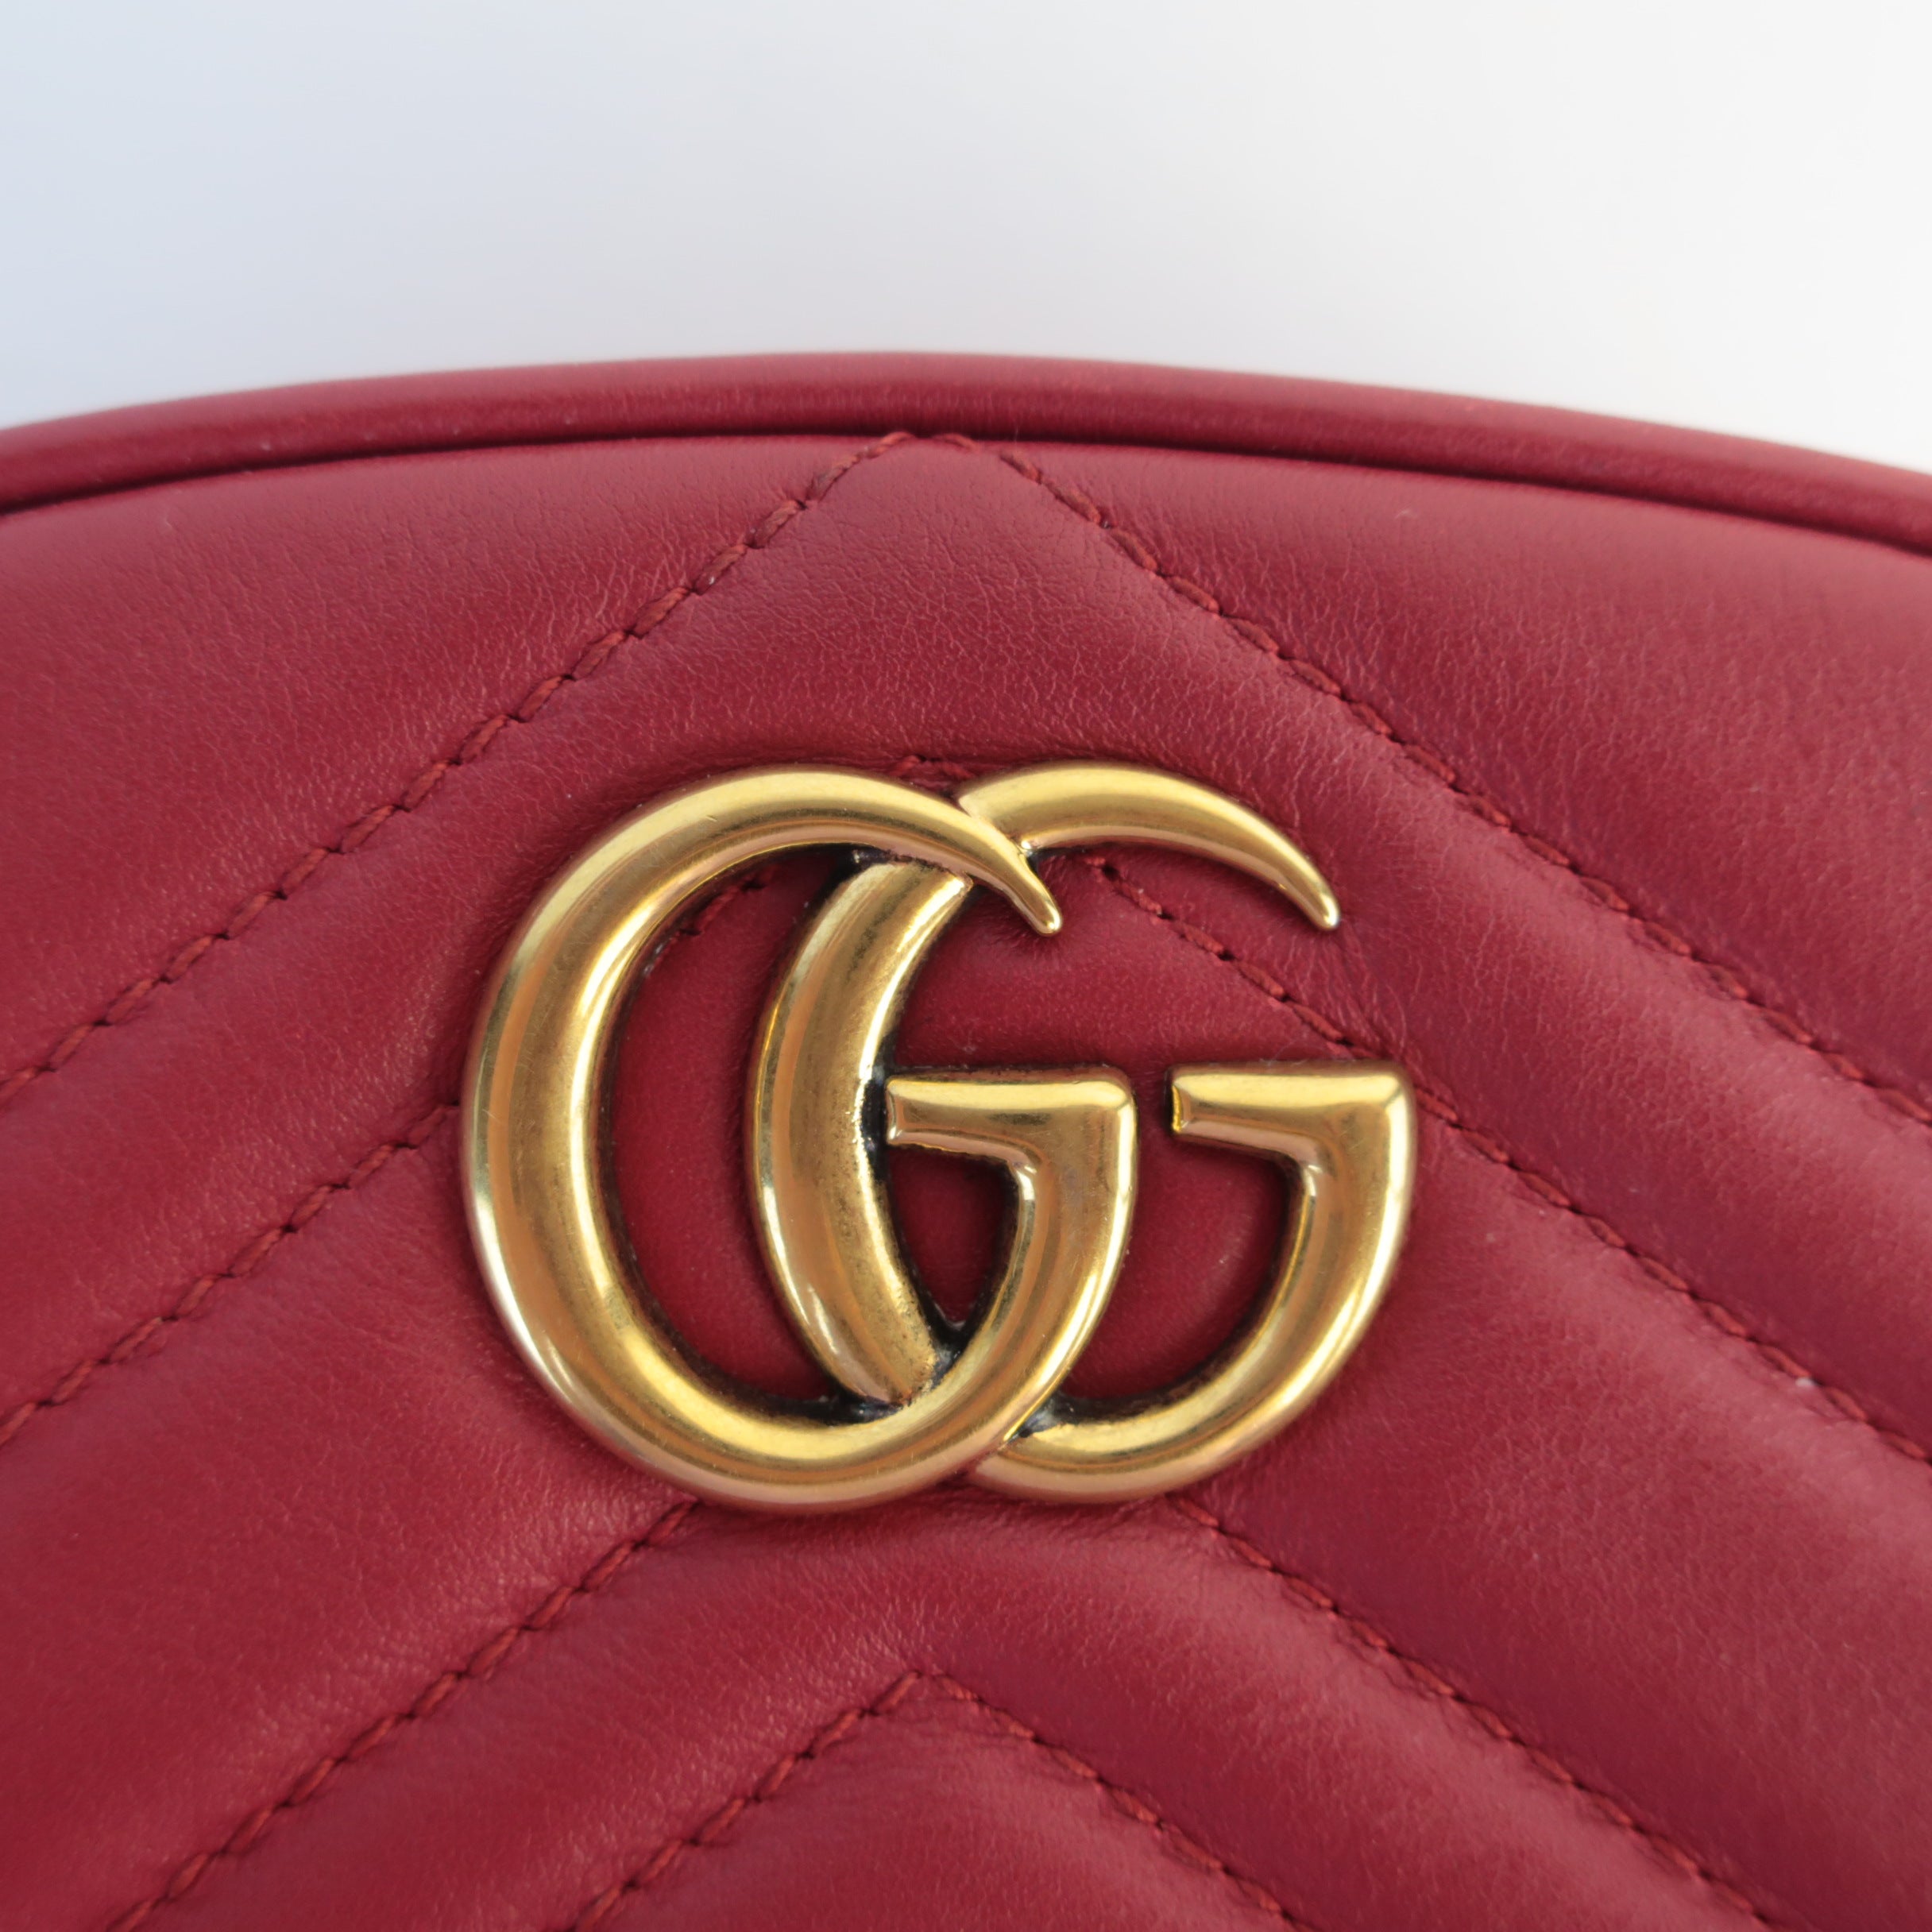 Gucci Bag Authentication Guide: 8 Steps To Spot a Fake | LVBagaholic